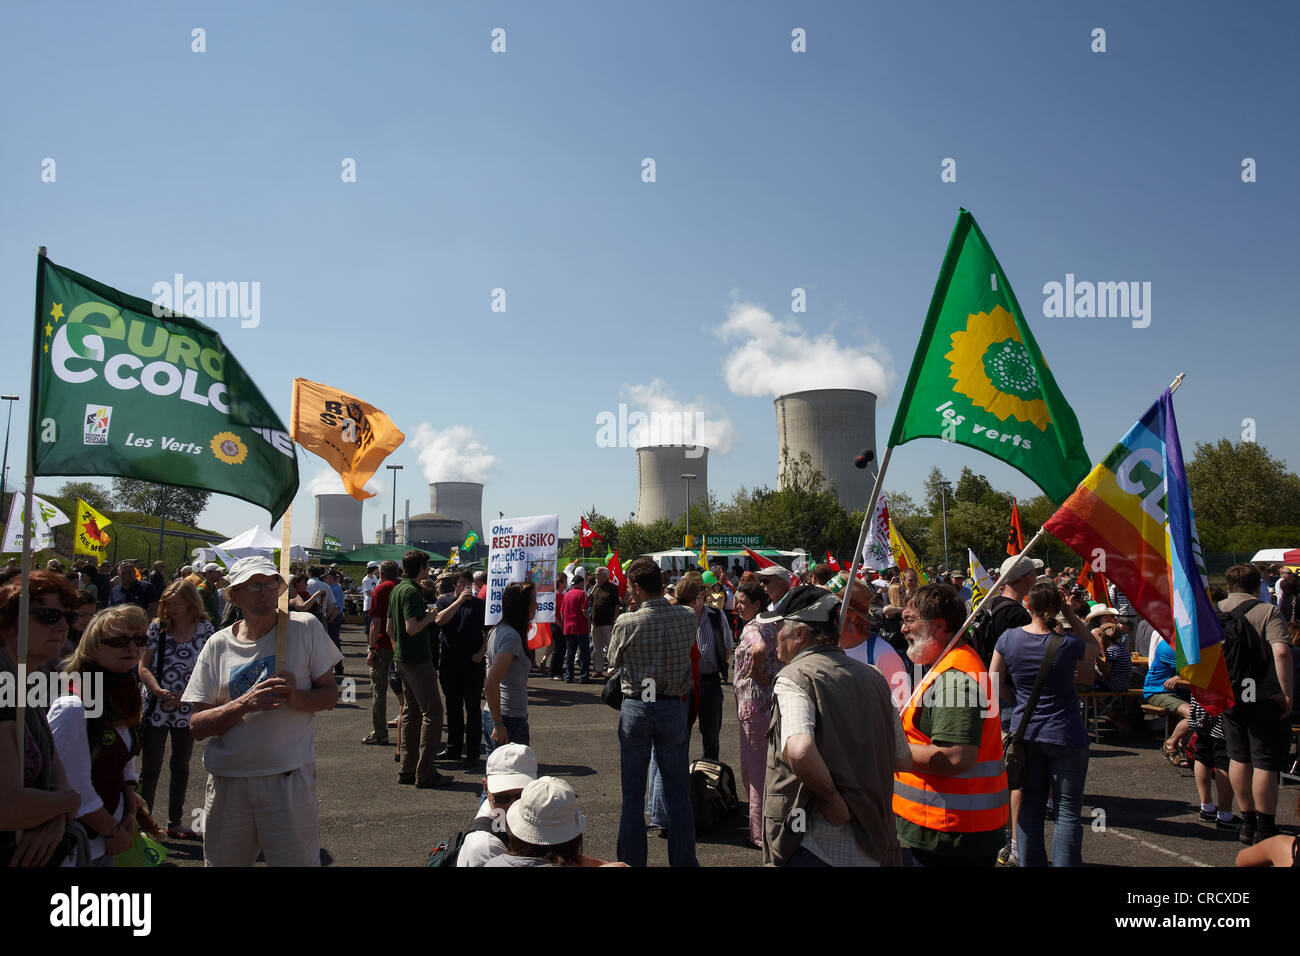 Protest in front of the French Cattenom Nuclear Power Plant, Lorraine region, France, Europe Stock Photo